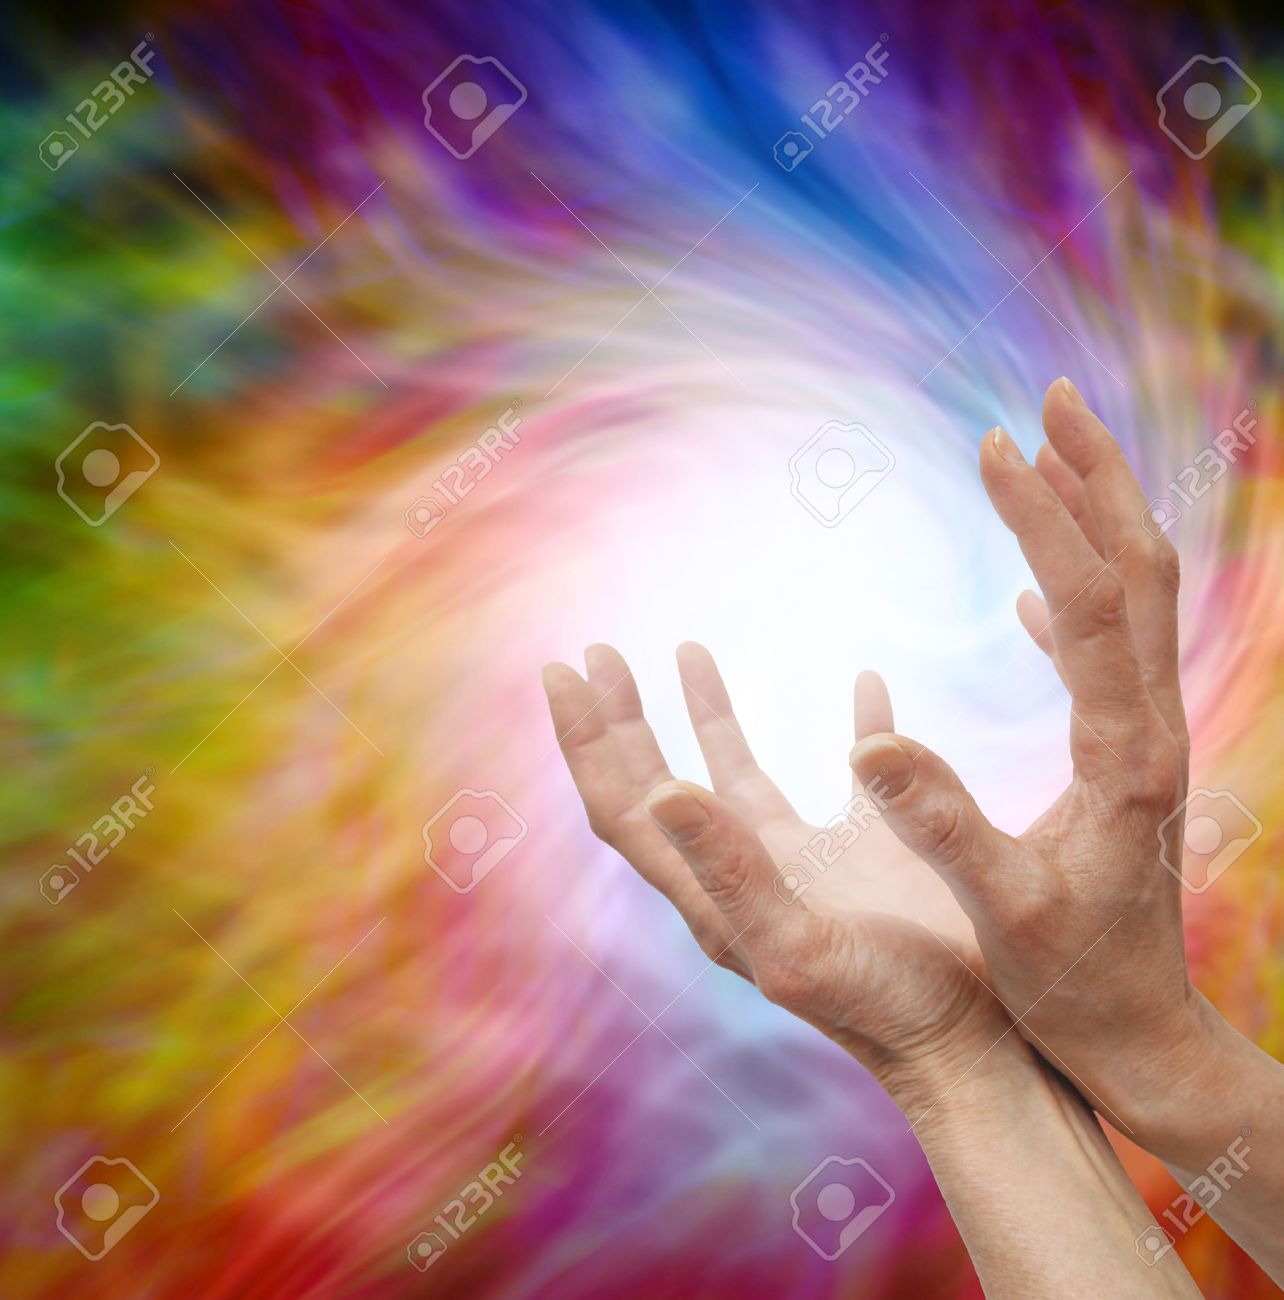 Outstretched Healing Hands On Vortex Swirling Energy Background